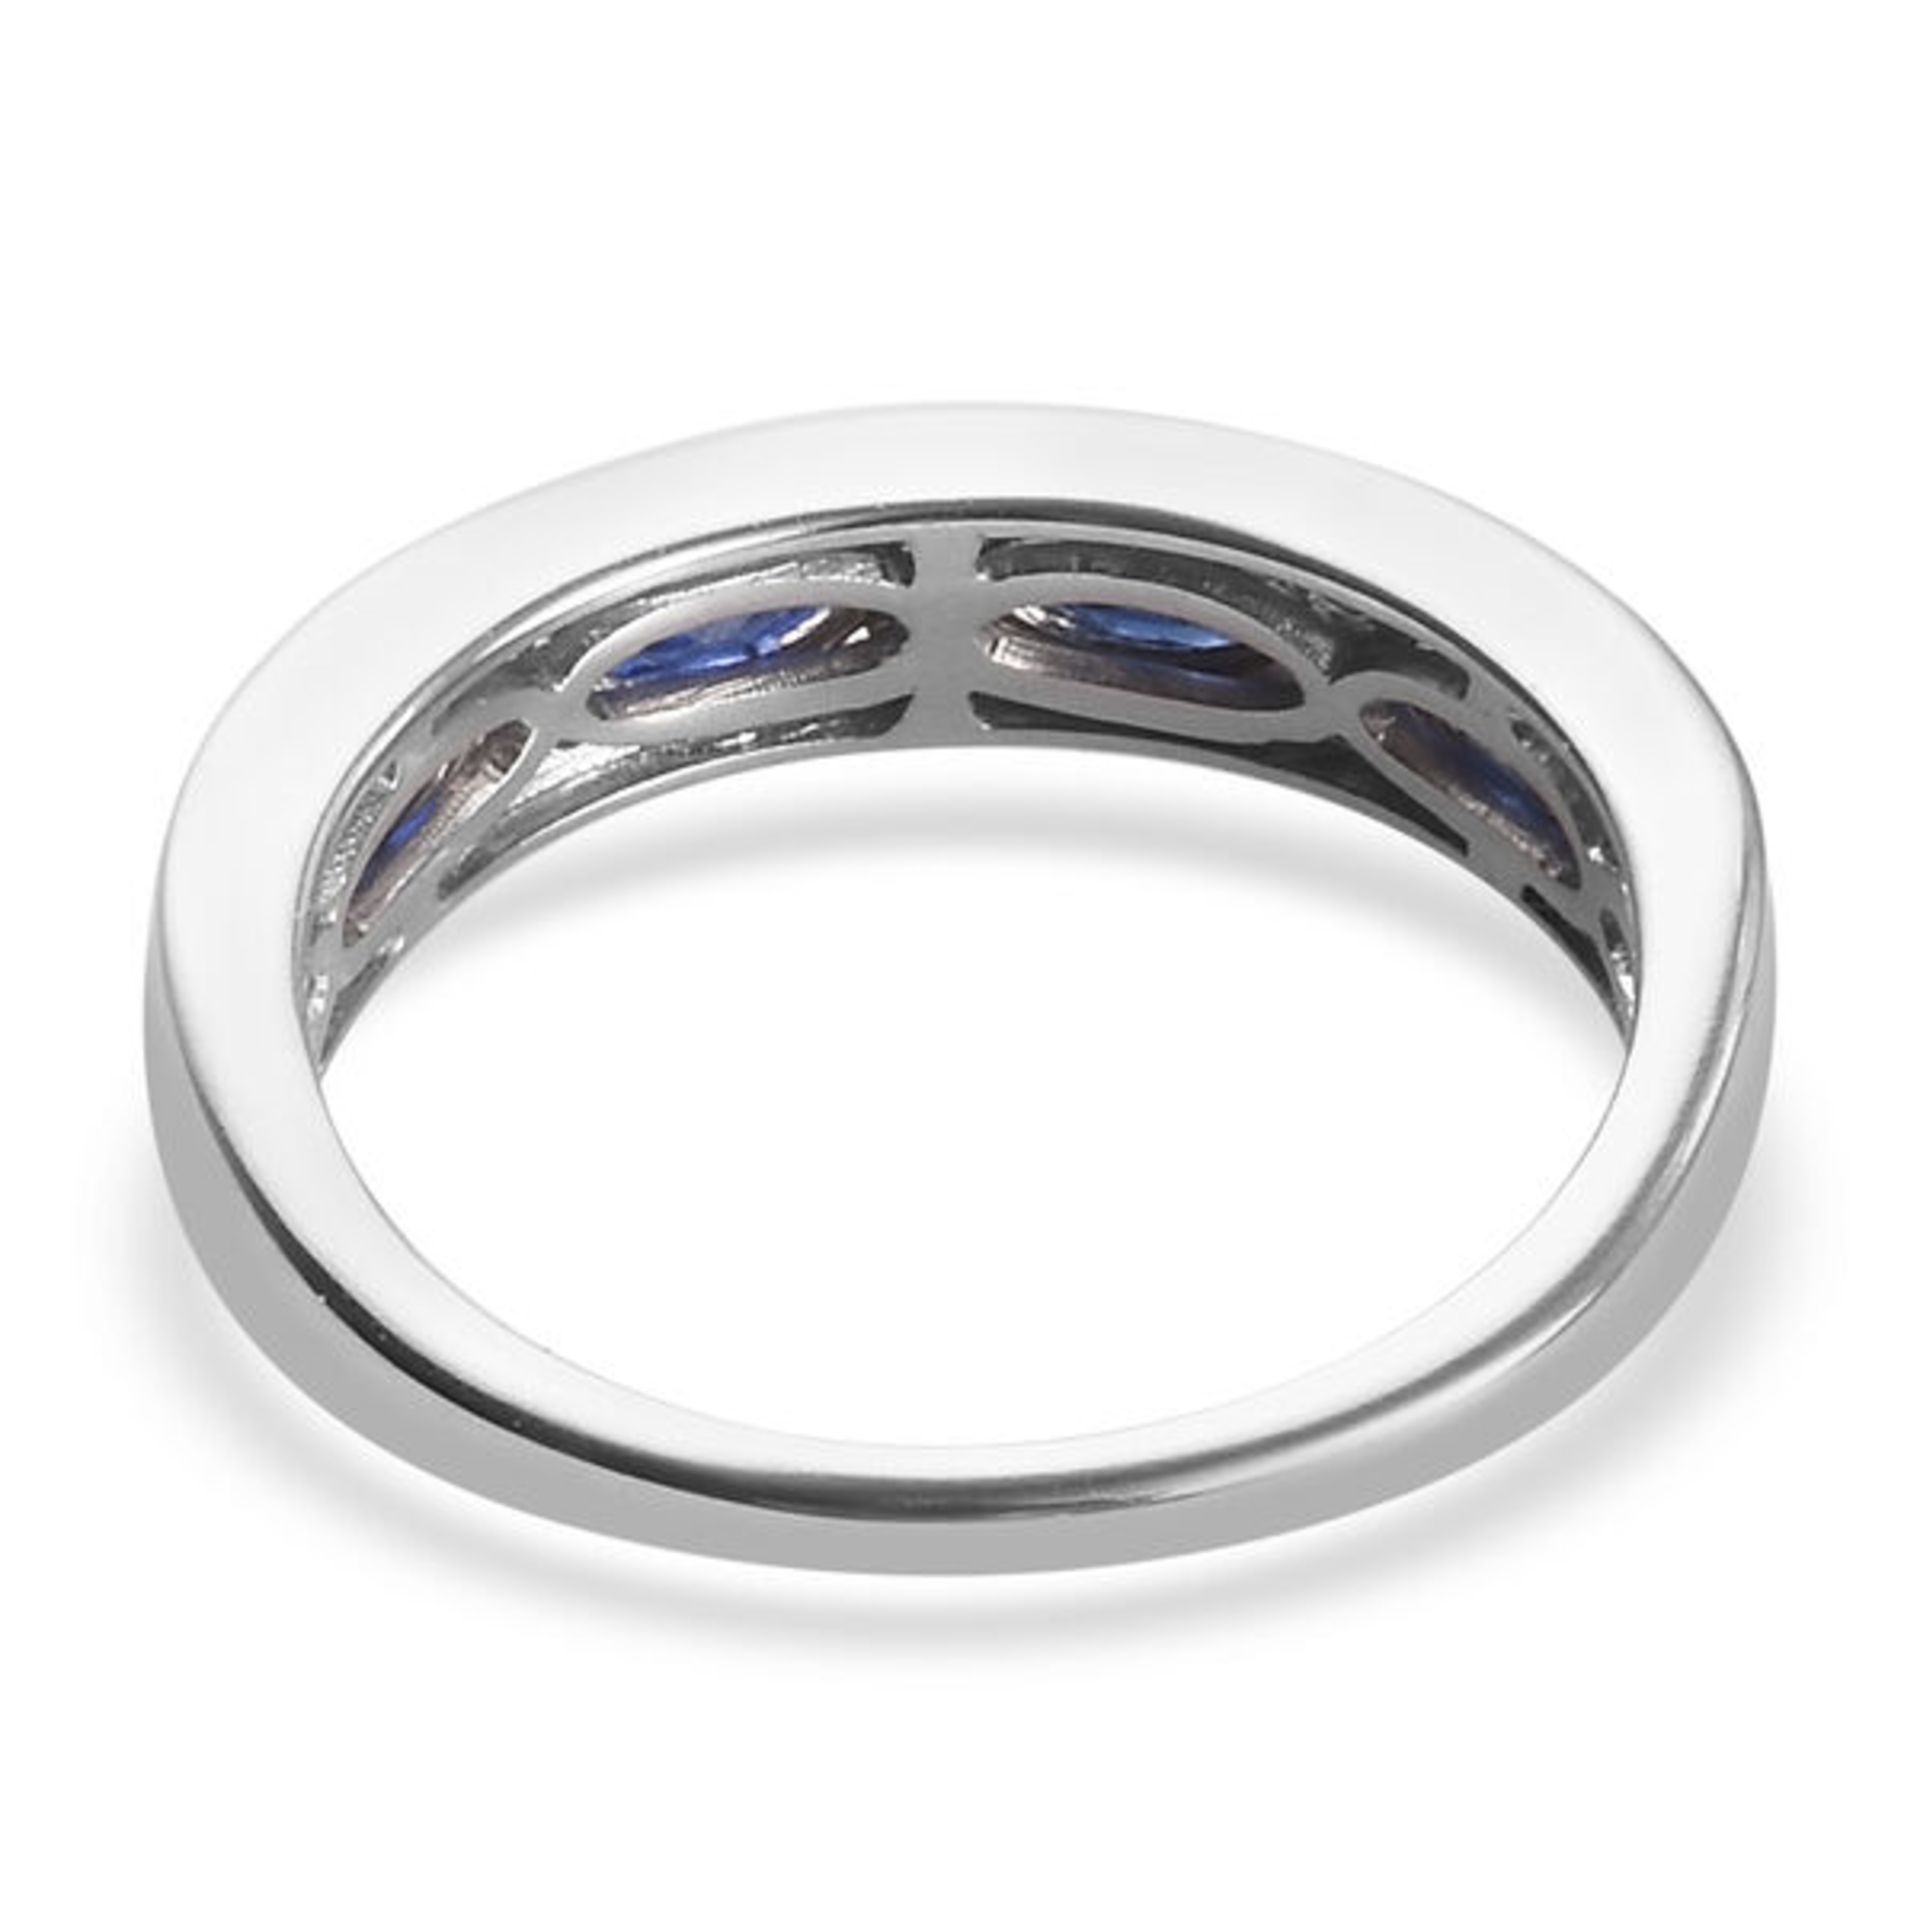 NEW!! 9K White Gold Natural Burmese Blue Sapphire and Diamond Band Ring - Image 3 of 4